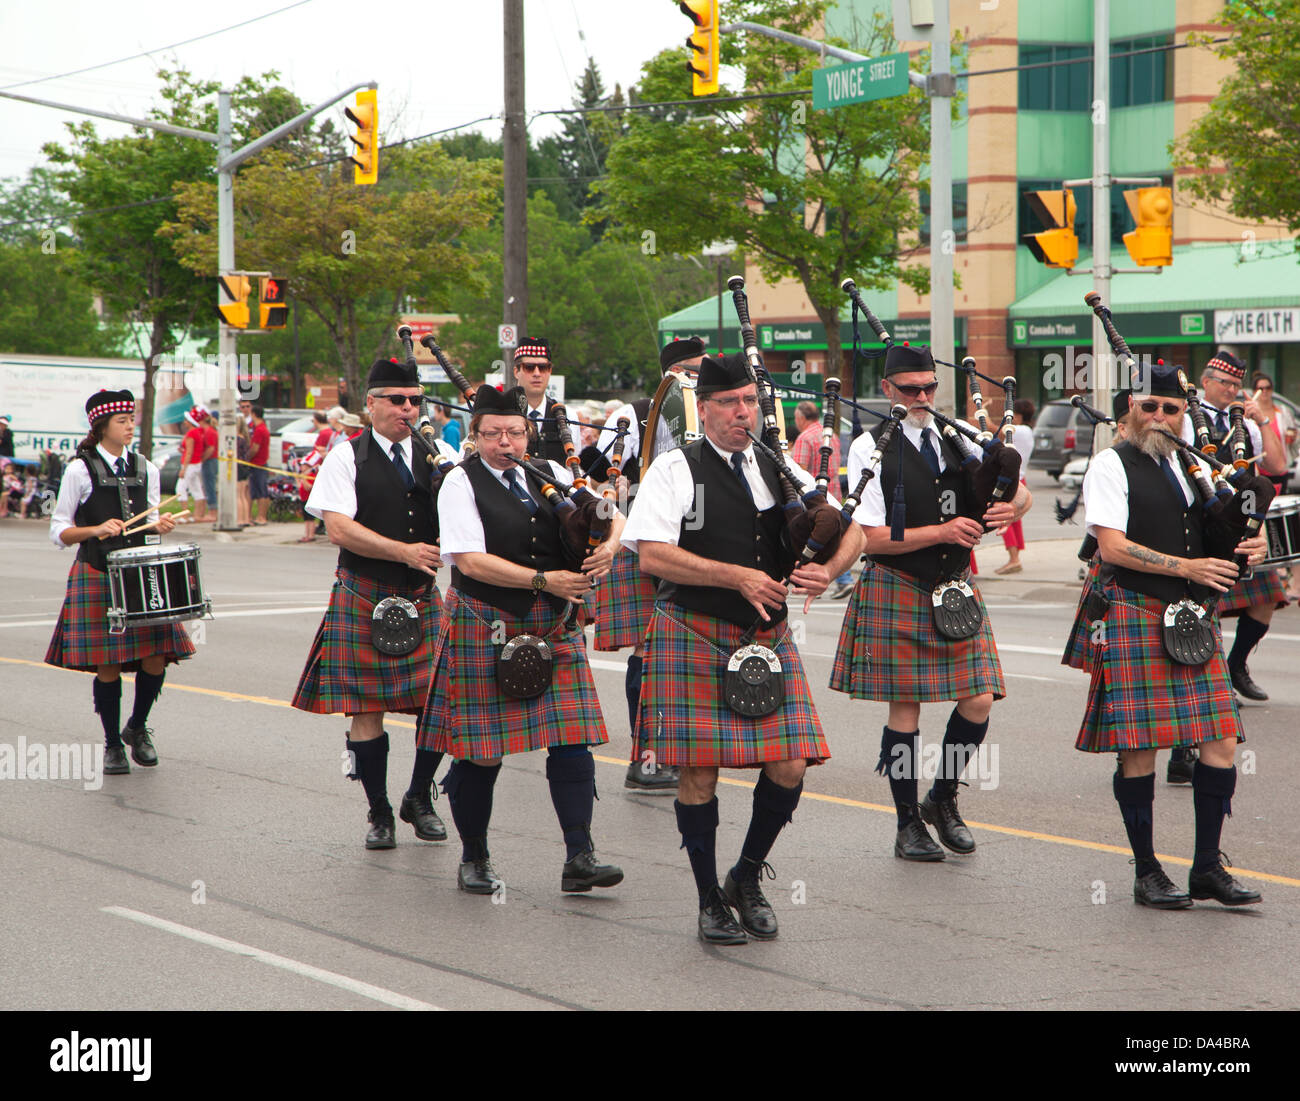 AURORA, ONTARIO, CANADA- JULY 1: Irishmen in their kilt playing their bagpipes during the Canada Day Parade at part of Young Str Stock Photo